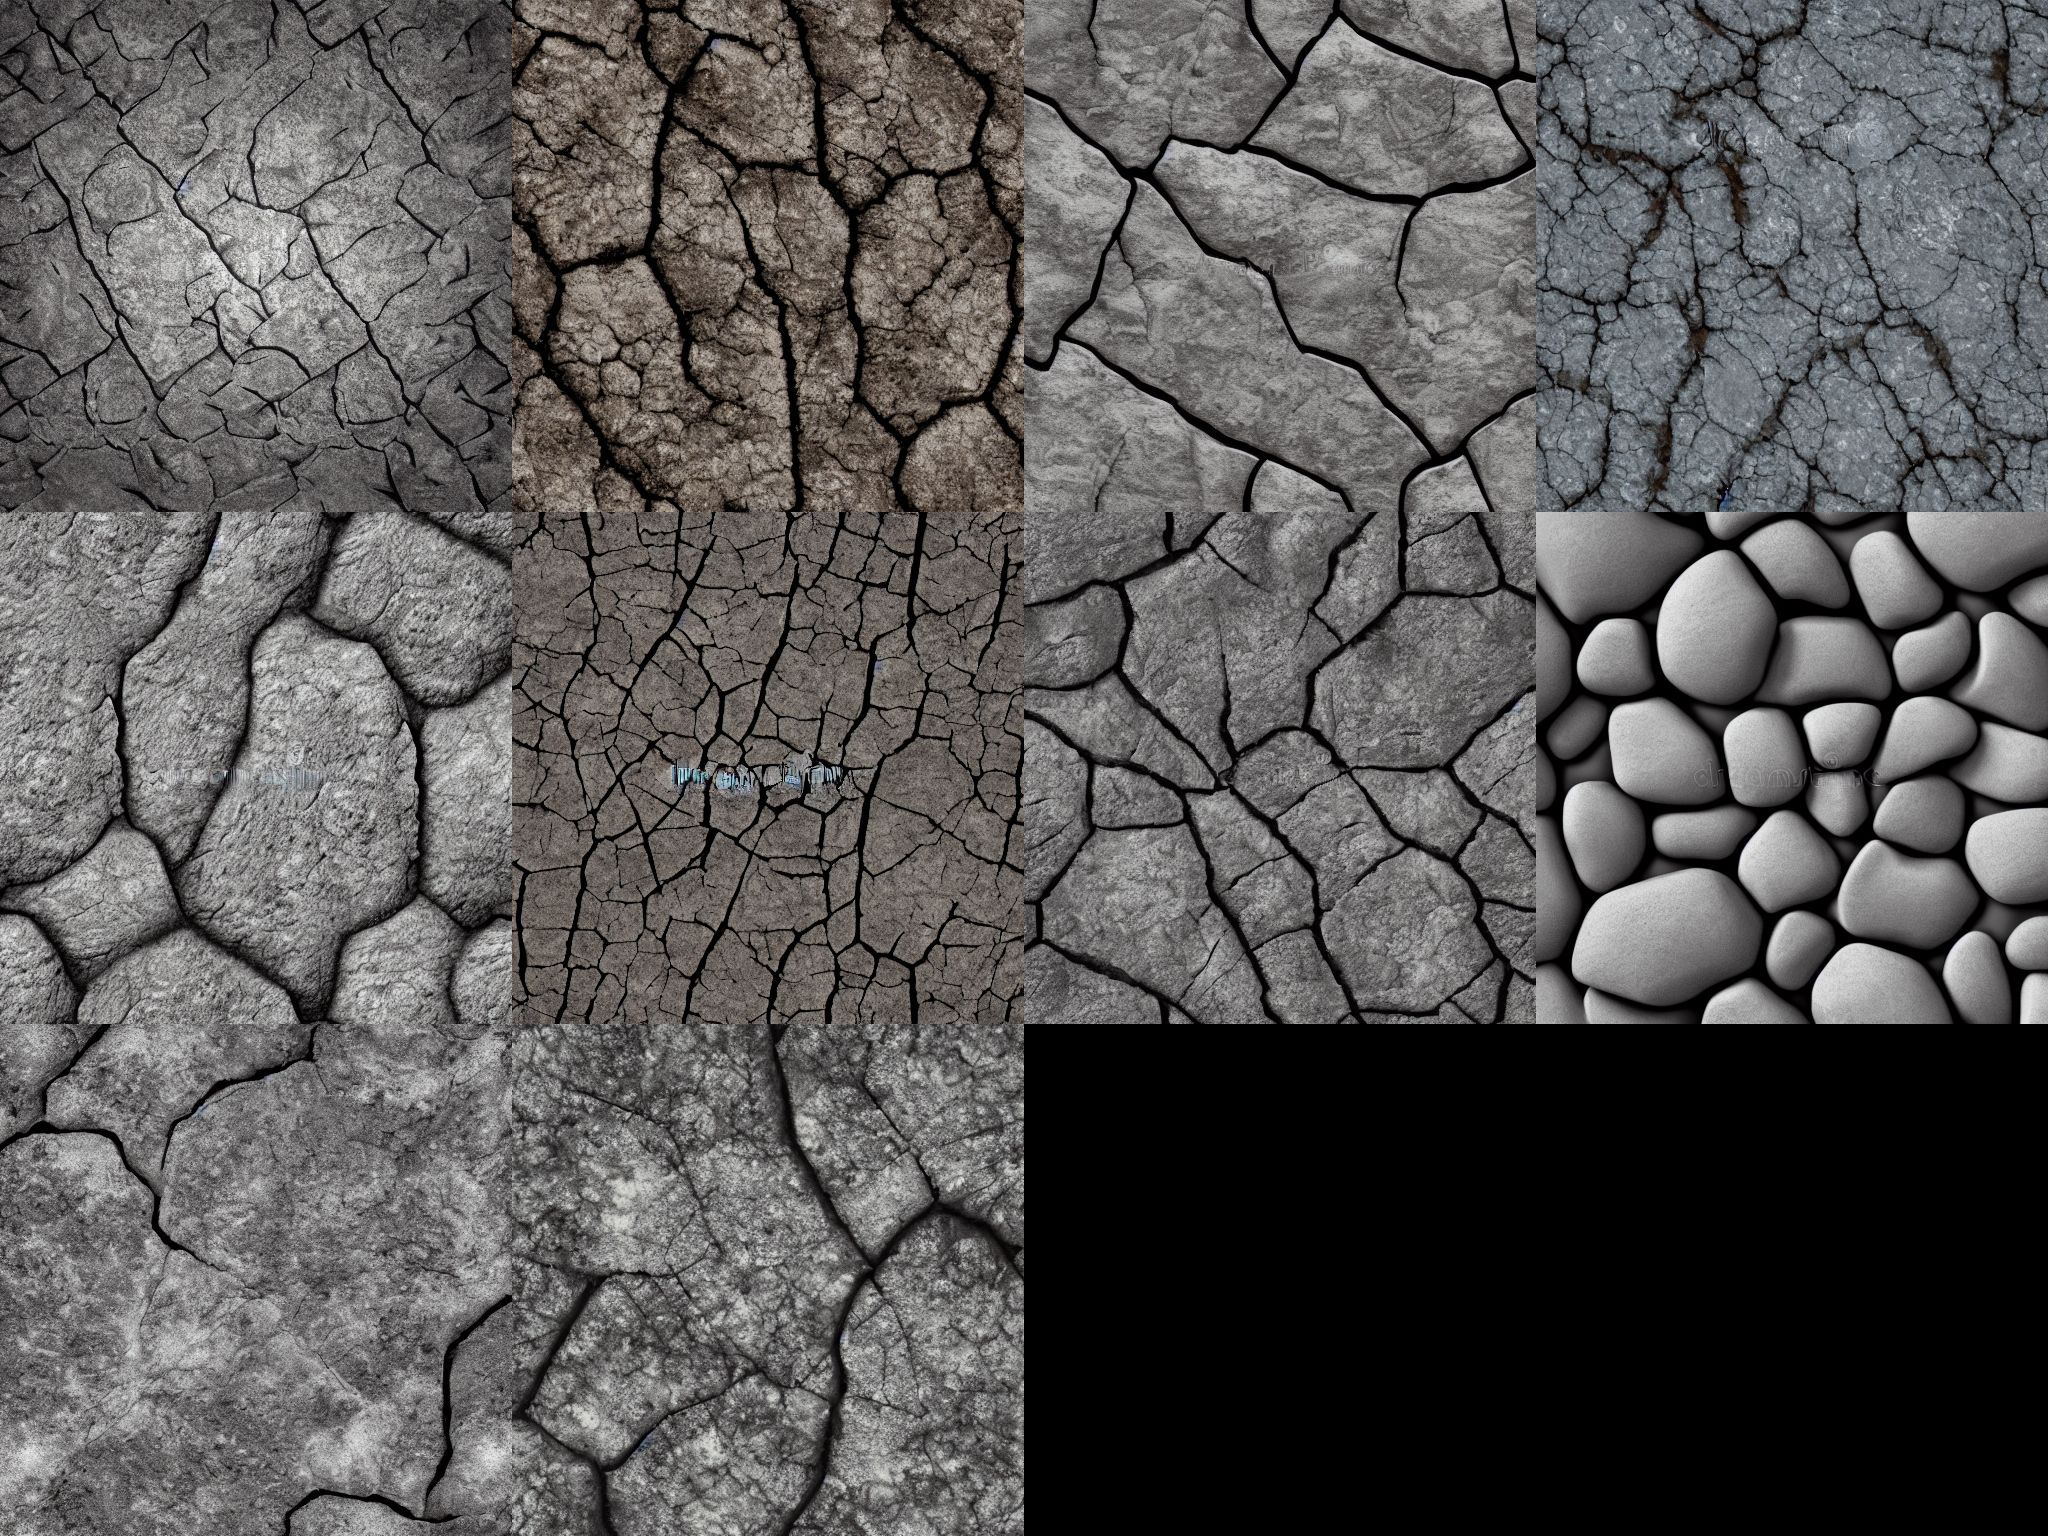 A tiled image of 10 potential stone textures generated with Stable Diffusion. 